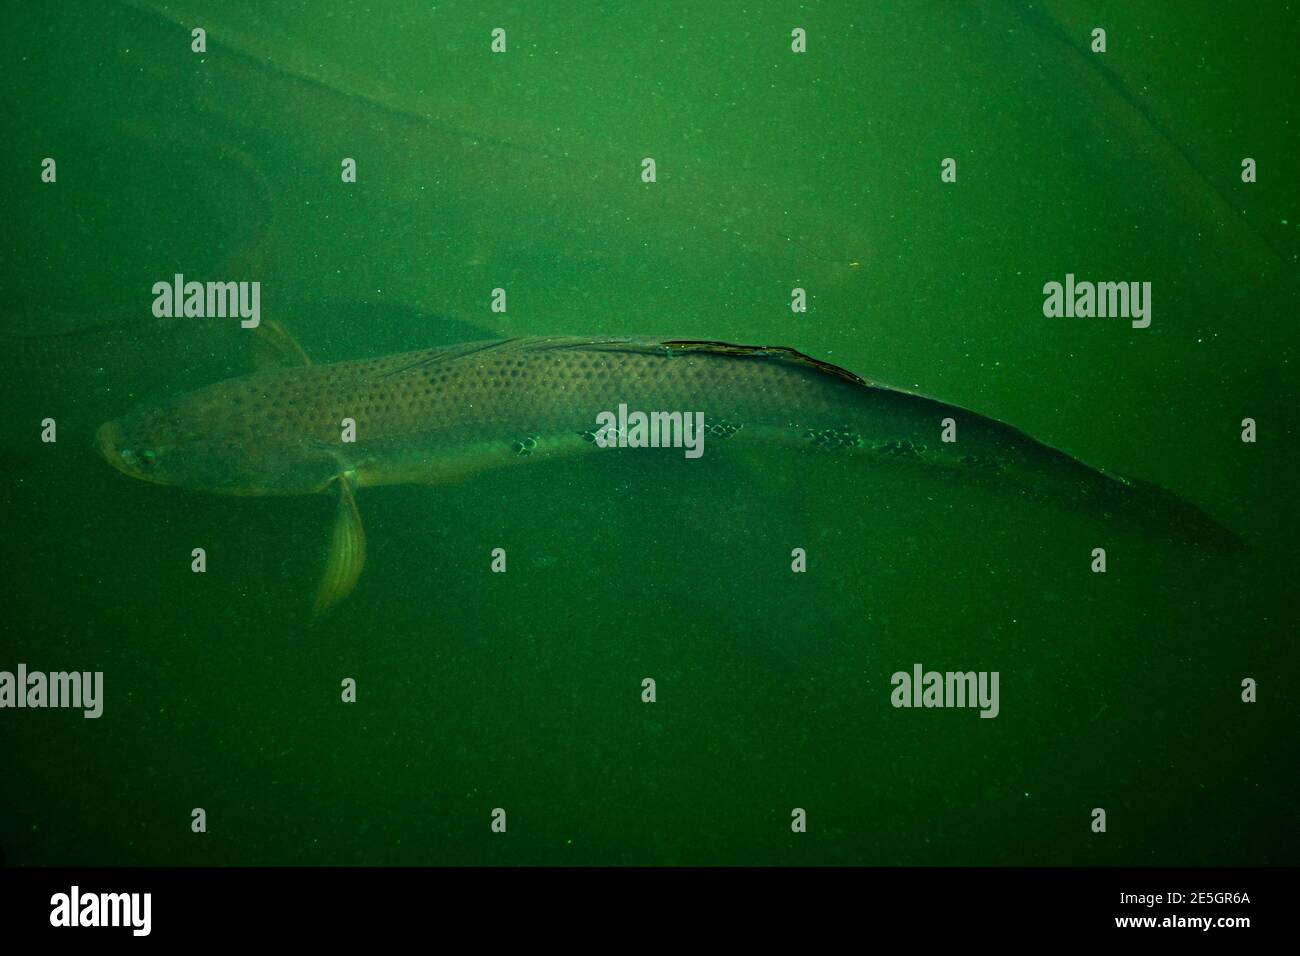 The Great snakehead Fish or Channa marulius of Channidae family in to the blue water Stock Photo